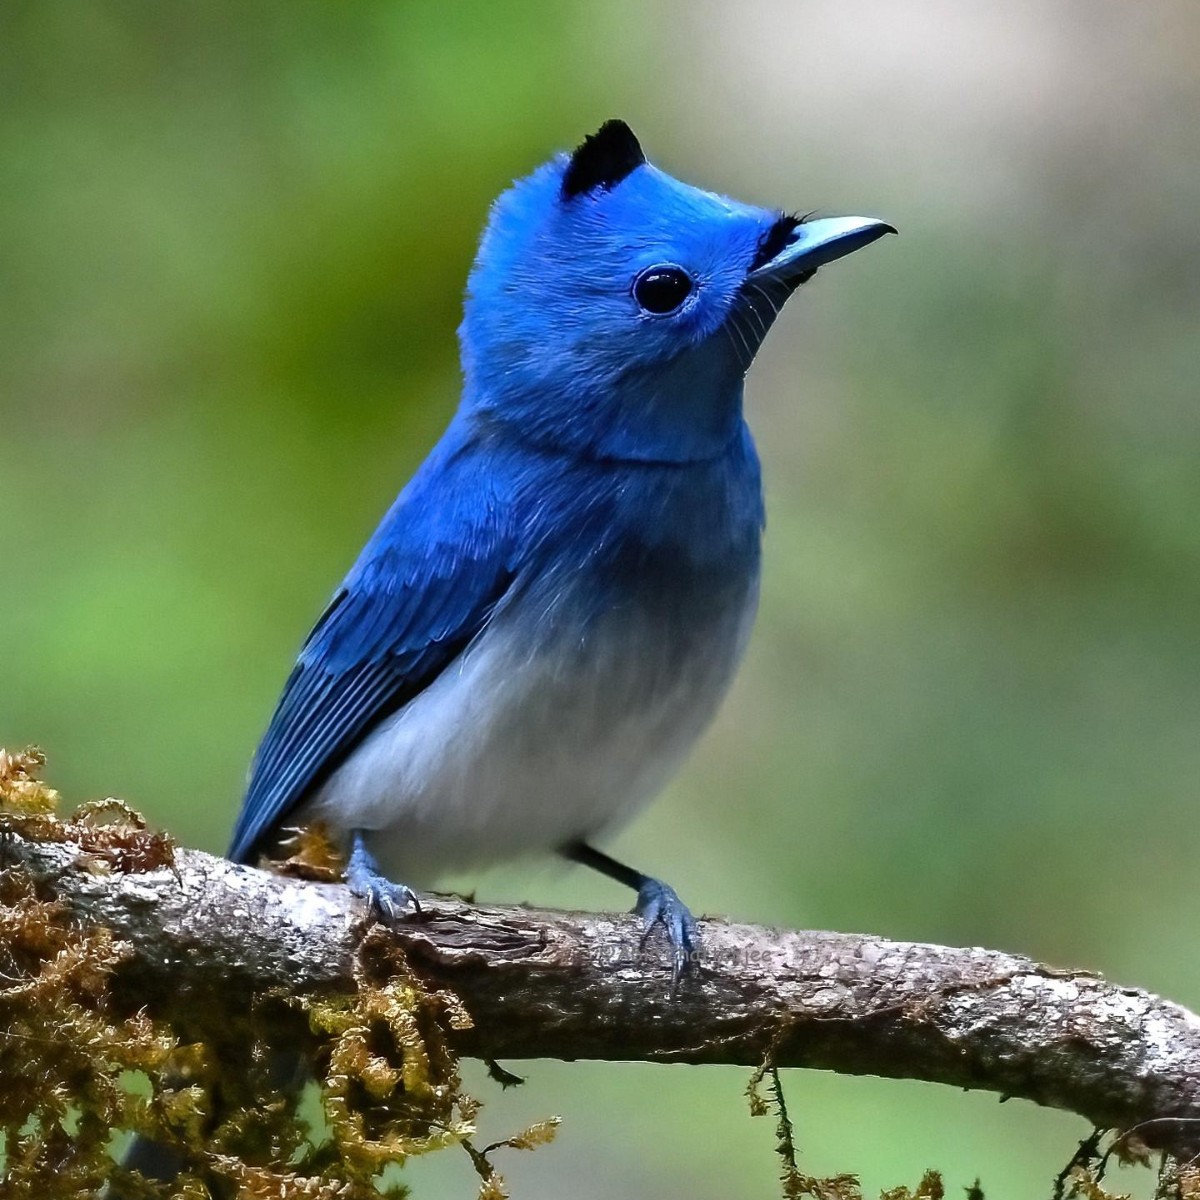 BBC Earth on X: "Why so blue 💙 The black-naped monarch (Hypothymis azurea) is found across tropical southern Asia, and lives in thick forests and other well-wooded habitats. #EarthCapture by @abirsnaps via